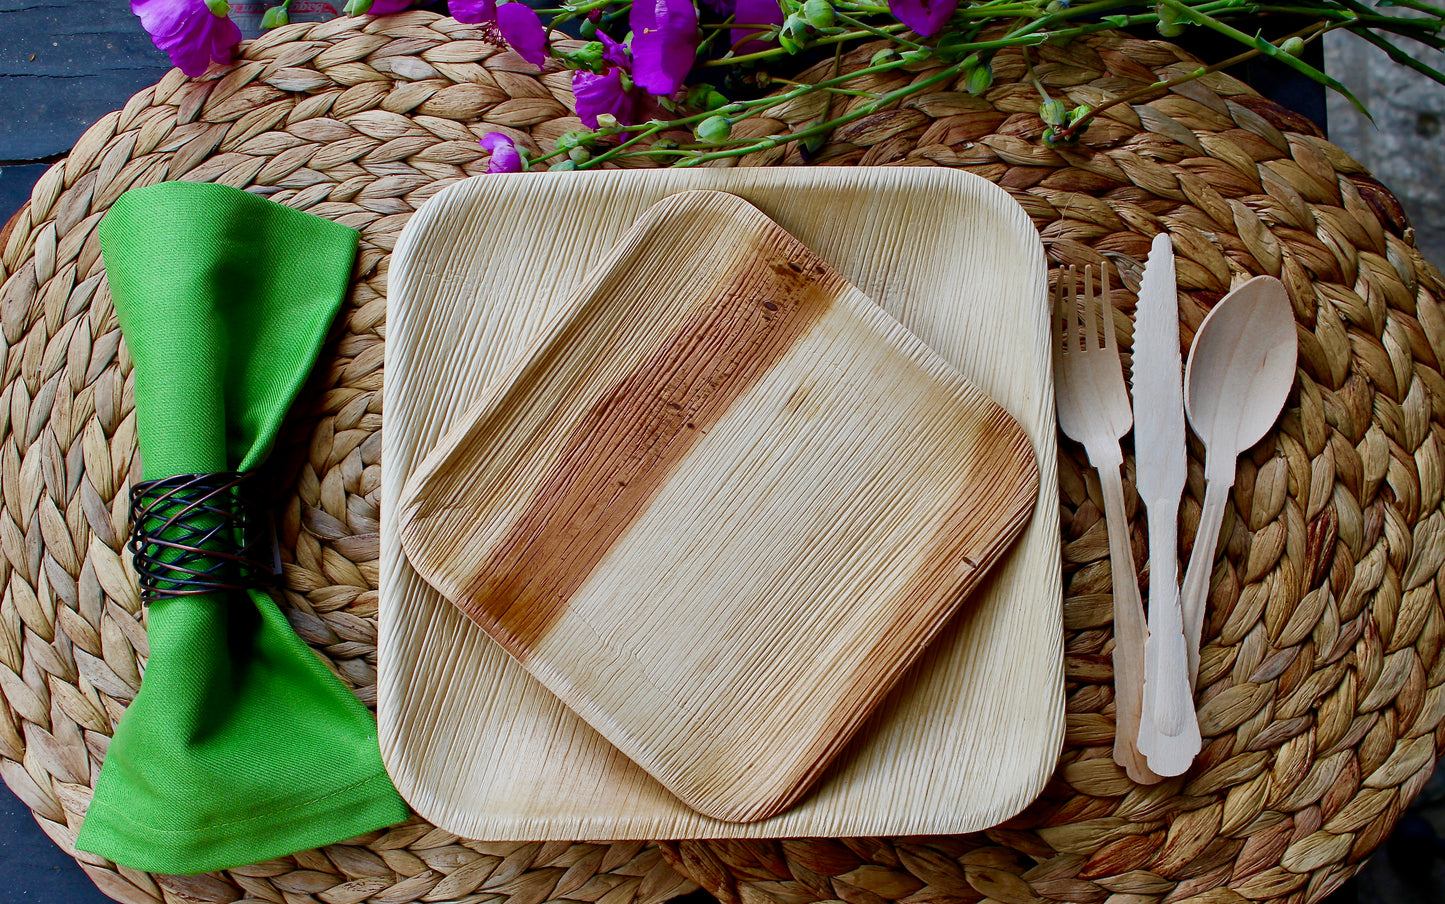 Bamboo Type Palm Leaf 25 Pic 10"Square  - 25 pice Square deep  6"- 25  pic  cup  - 75 pic Cutlery - 50 Pic Napkin